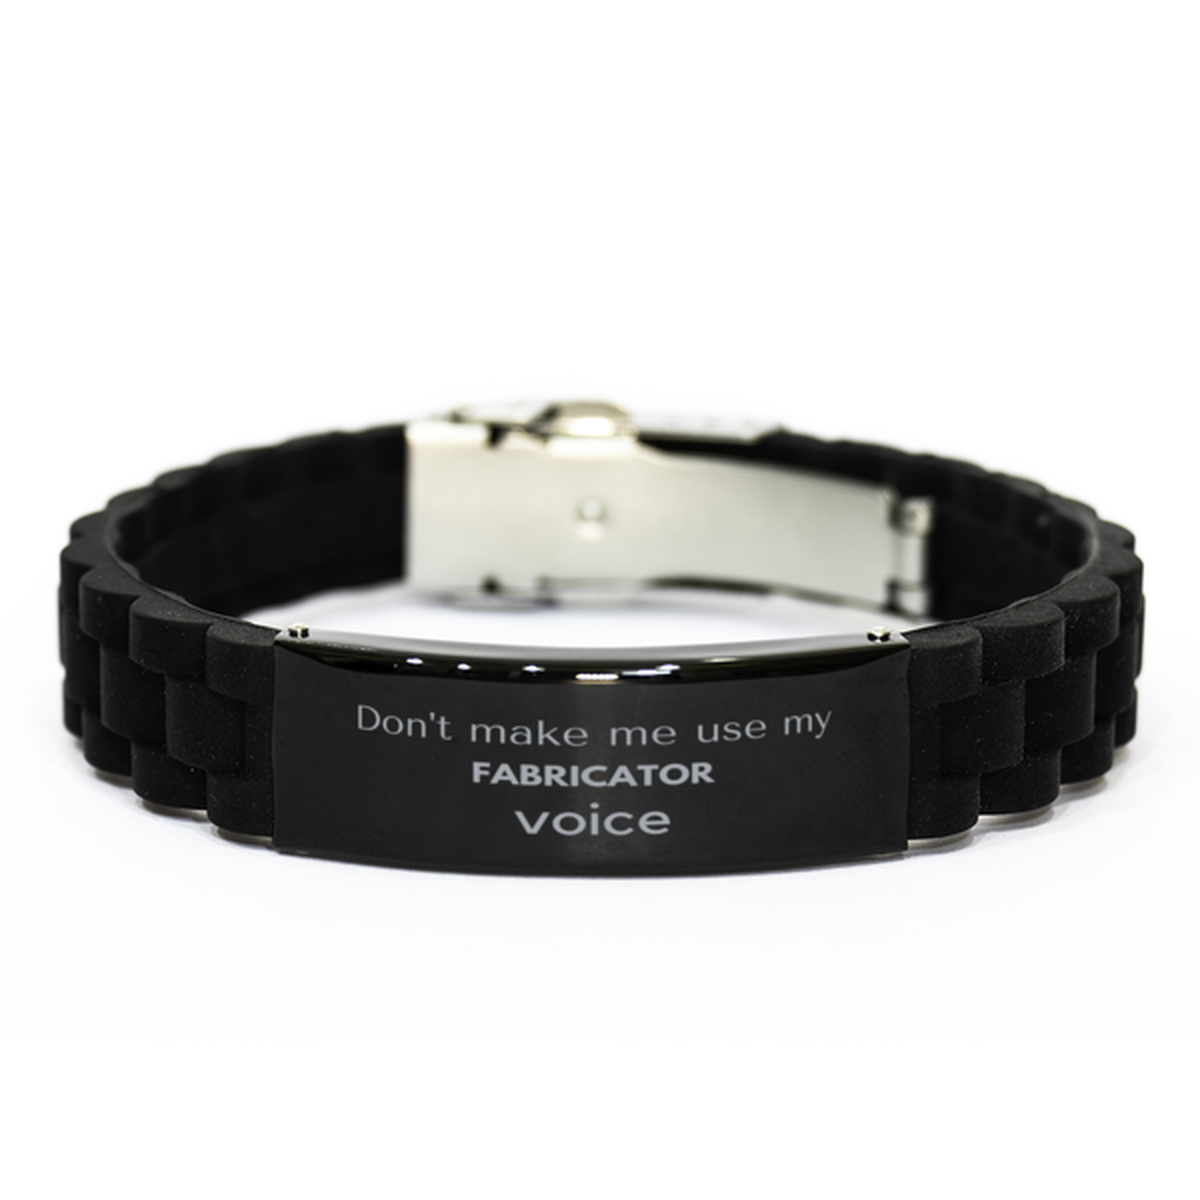 Don't make me use my Fabricator voice, Sarcasm Fabricator Gifts, Christmas Fabricator Black Glidelock Clasp Bracelet Birthday Unique Gifts For Fabricator Coworkers, Men, Women, Colleague, Friends